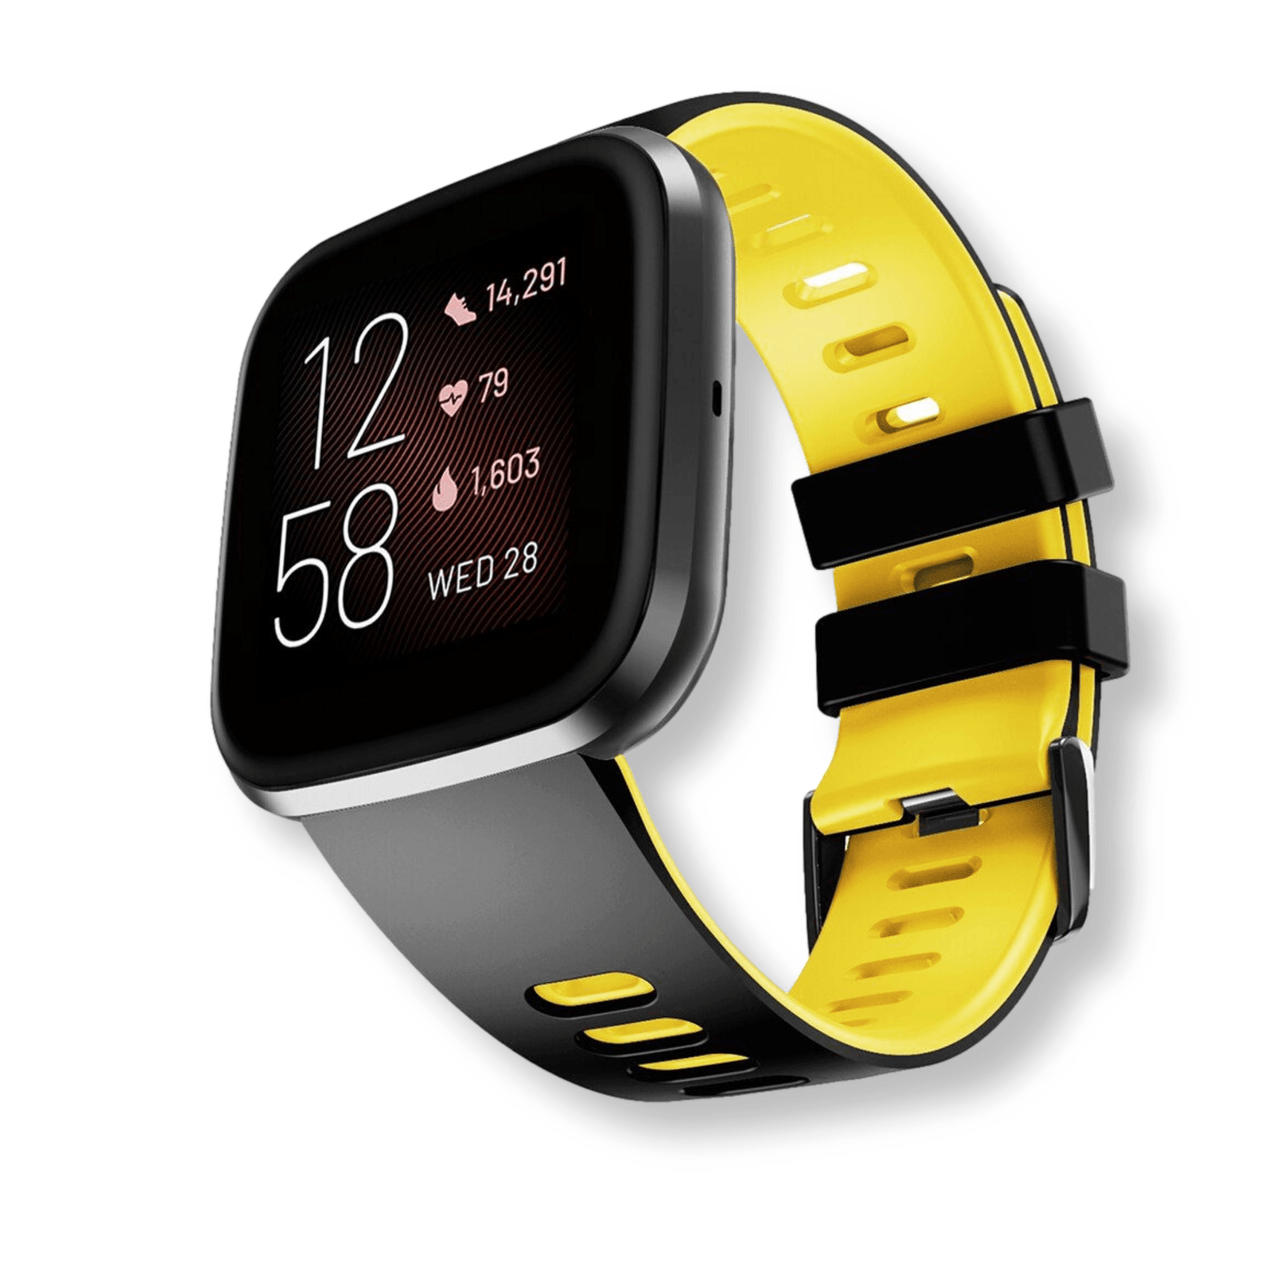 Dual Color Silicone Straps for Fitbit Versa / Versa 2 / Versa Lite - watchband.direct